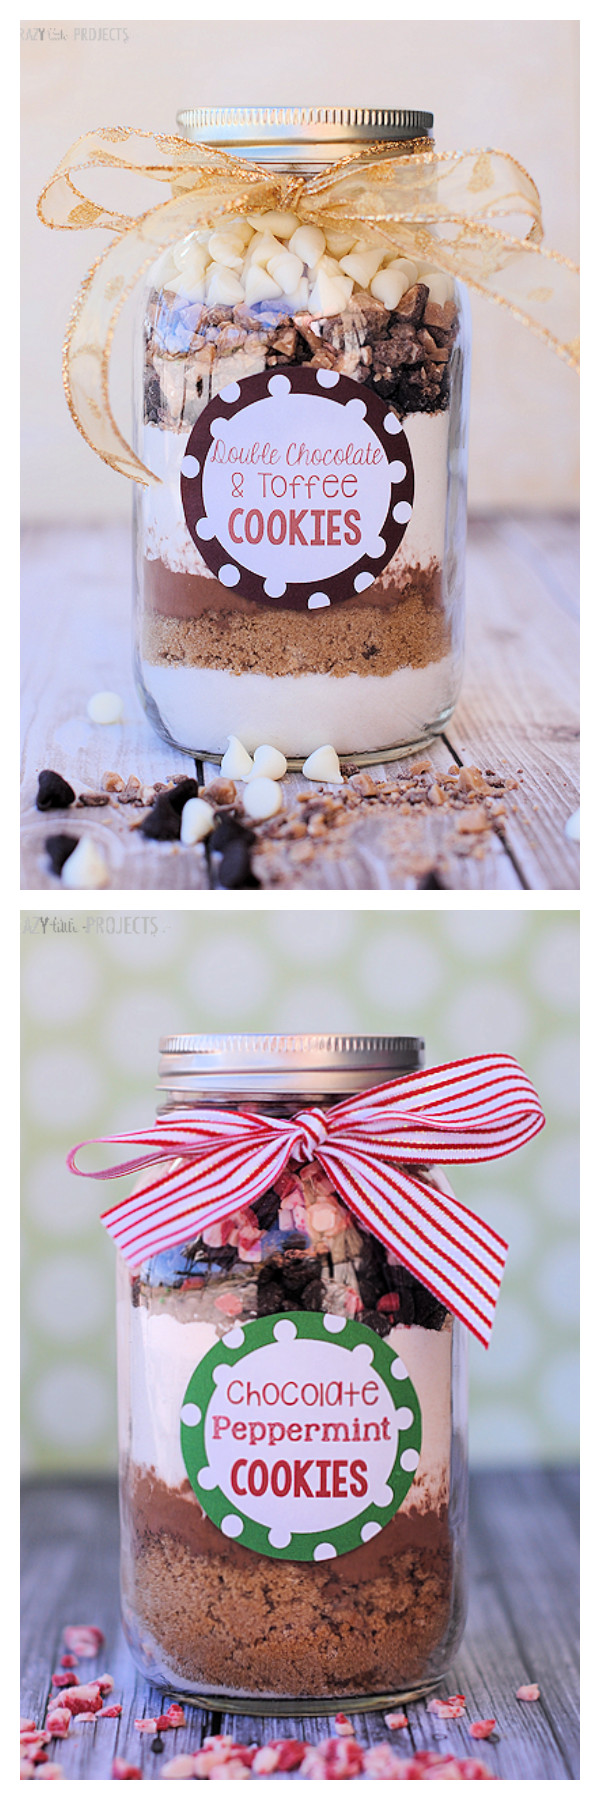 Cookies Gifts For Christmas
 Cookies in a Jar Gift